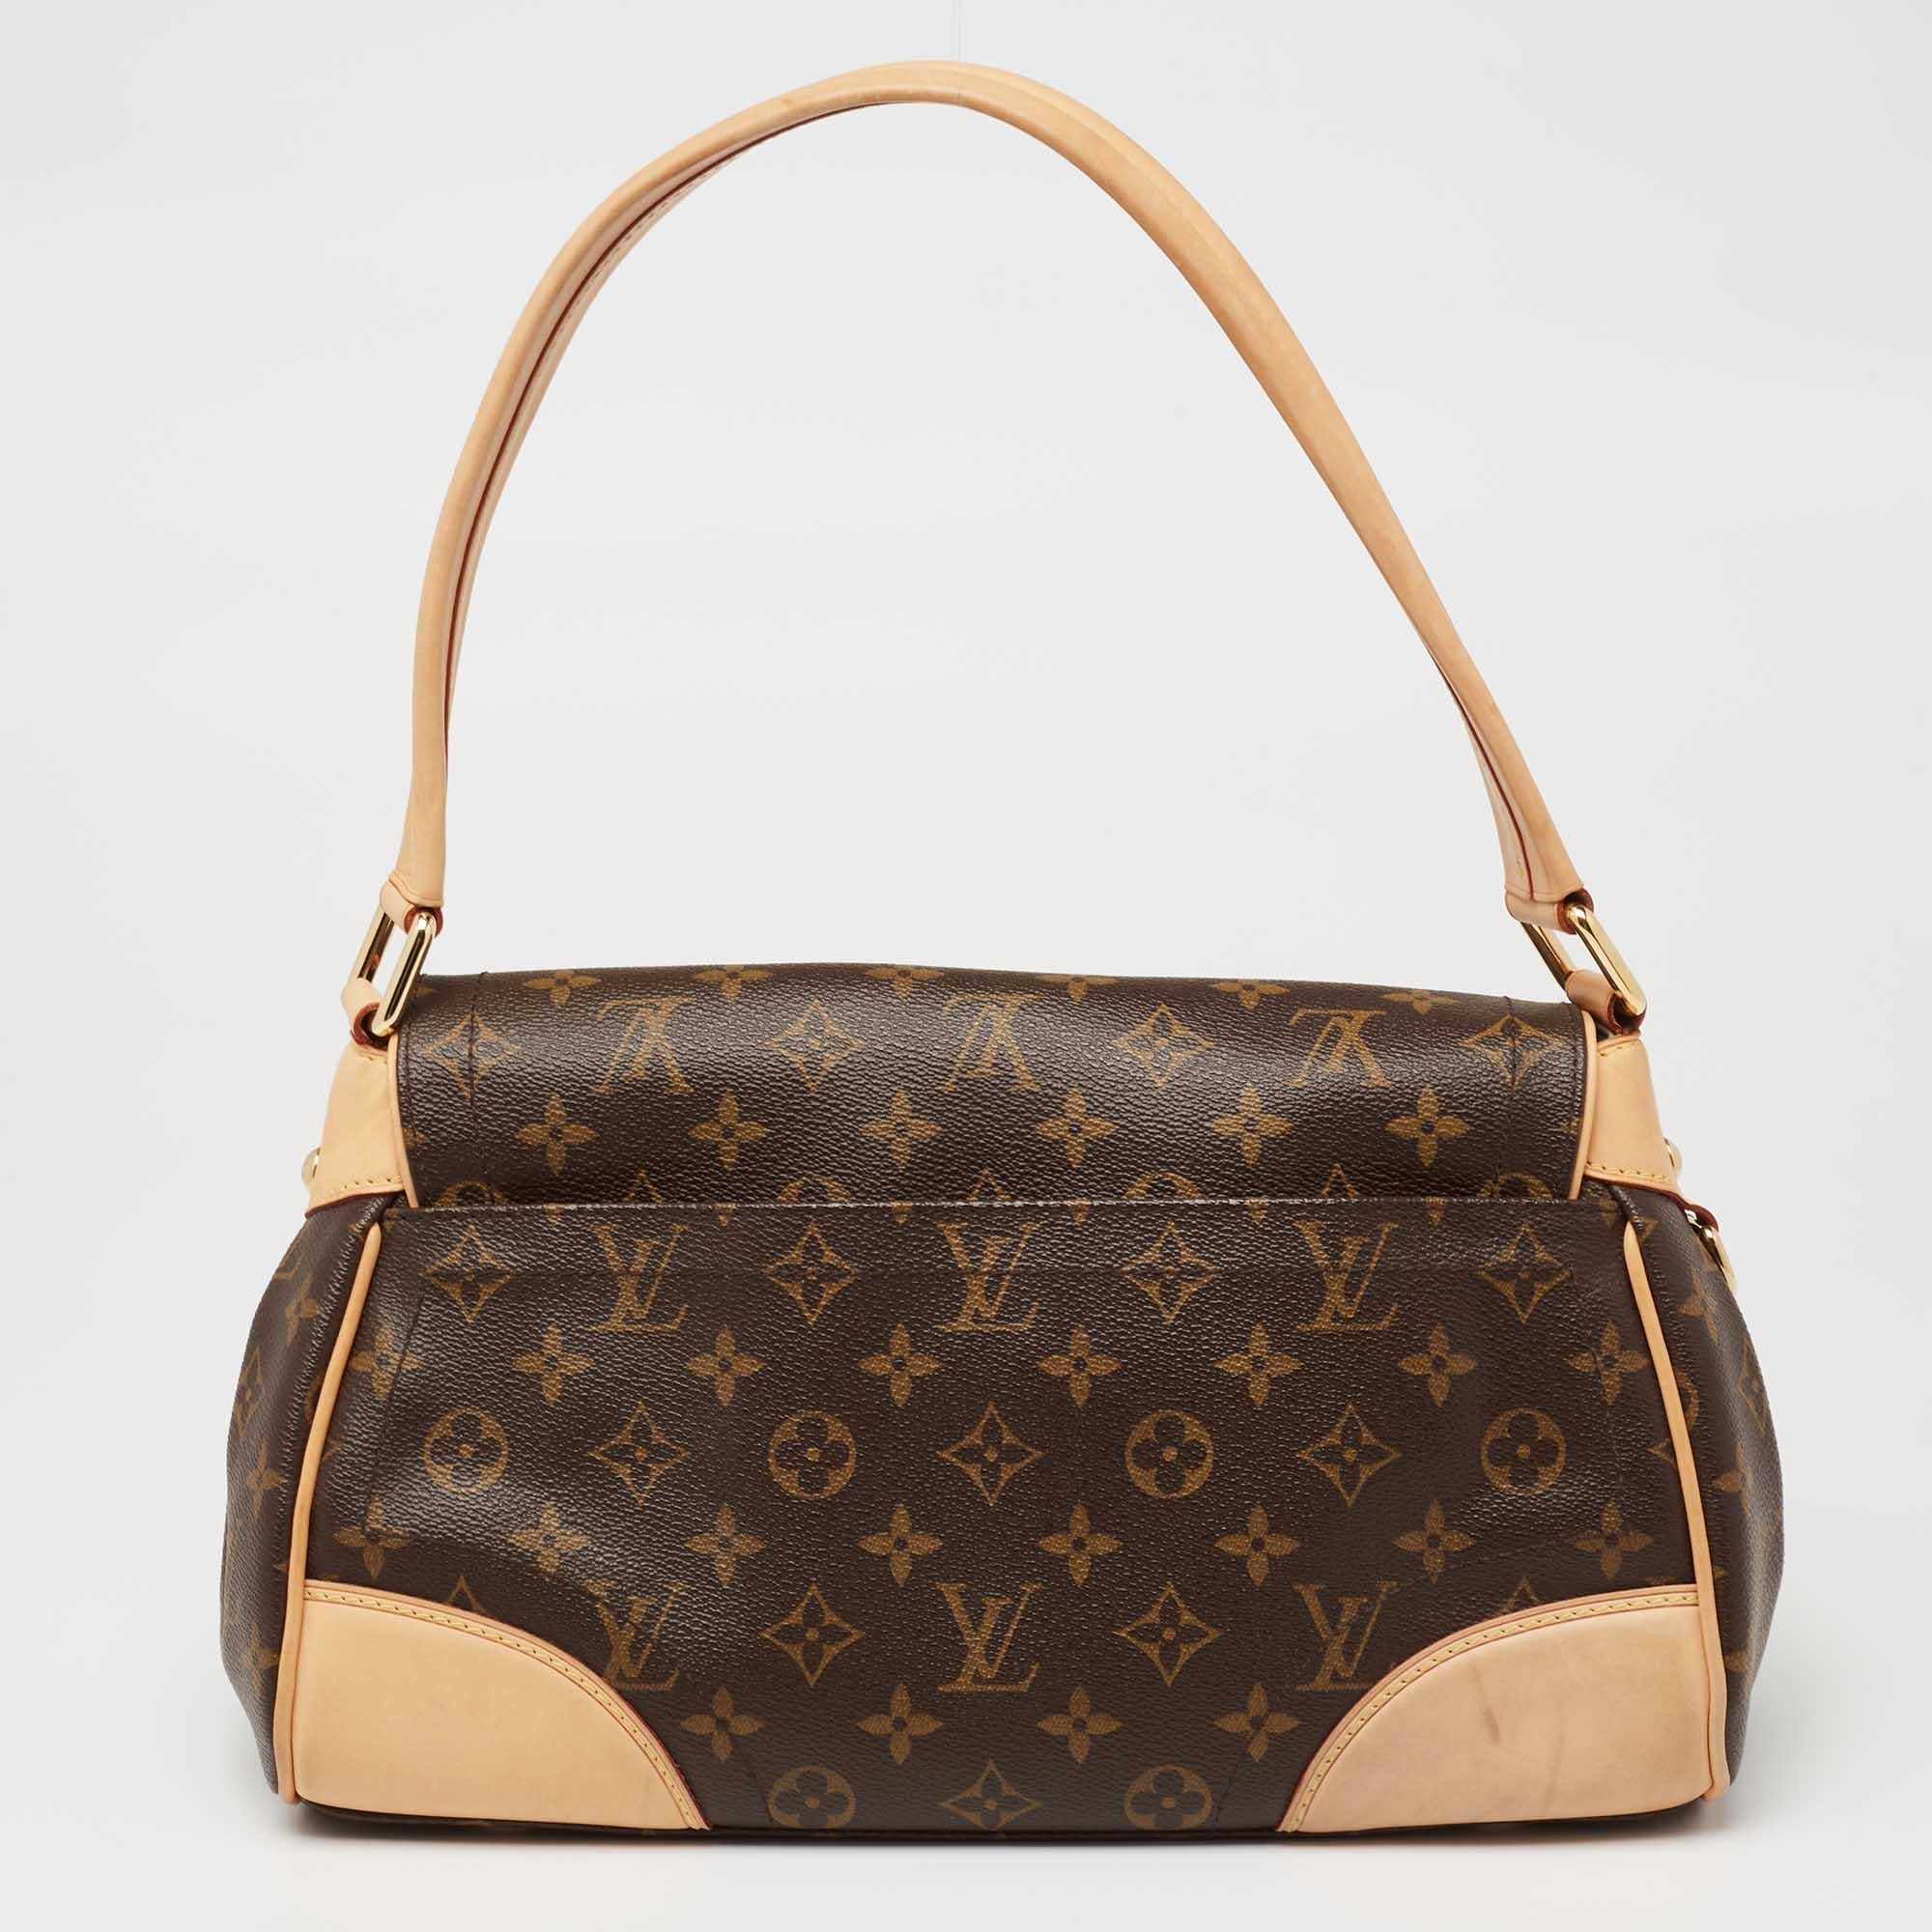 Incorporate luxury and sophistication into your everyday style with this Louis Vuitton Beverly bag. Named after Beverly Hills in LA, this bag is crafted from the signature monogram canvas with leather trims. The branded lock closure on the front